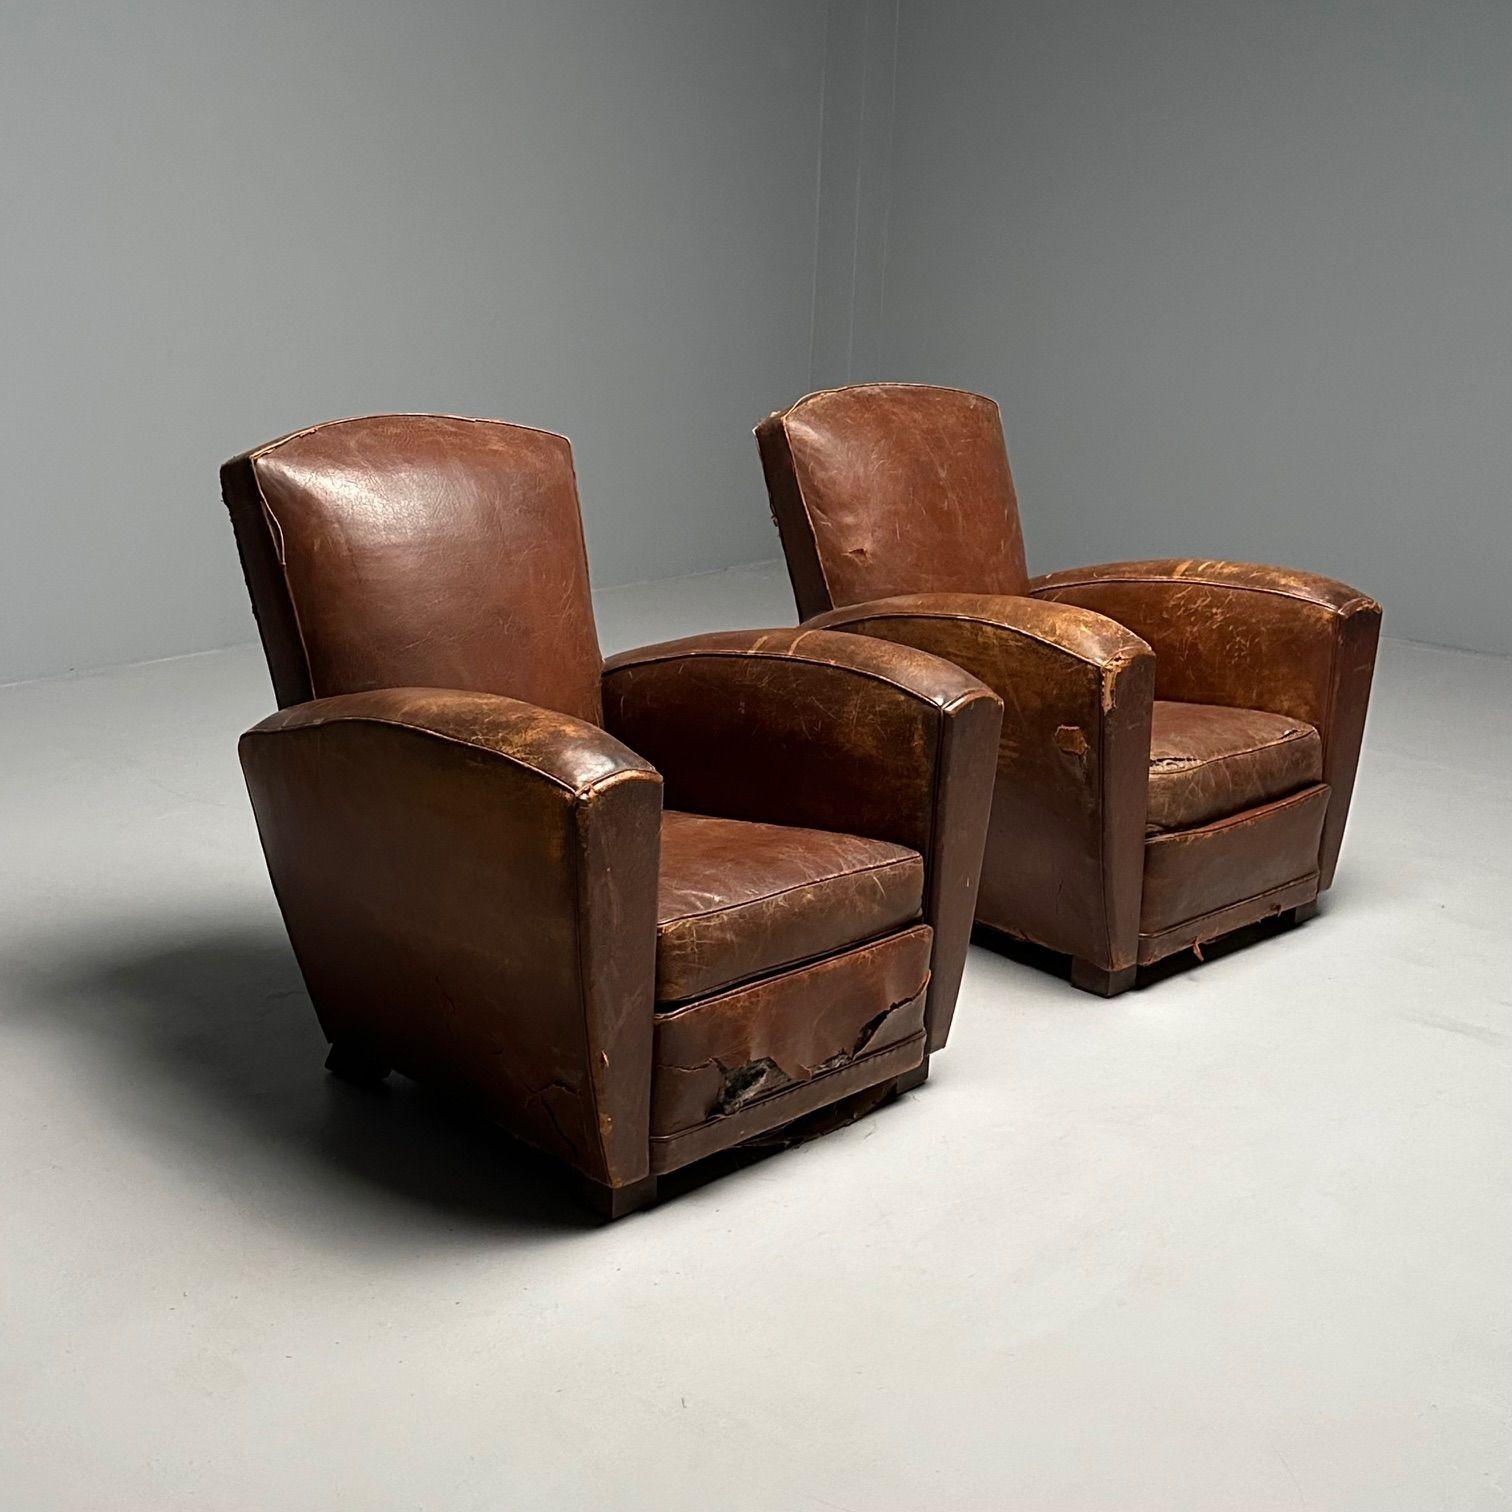 Jacques Adnet Style, French Art Deco Club Chairs, Distressed Leather, Oak, 1930s For Sale 8